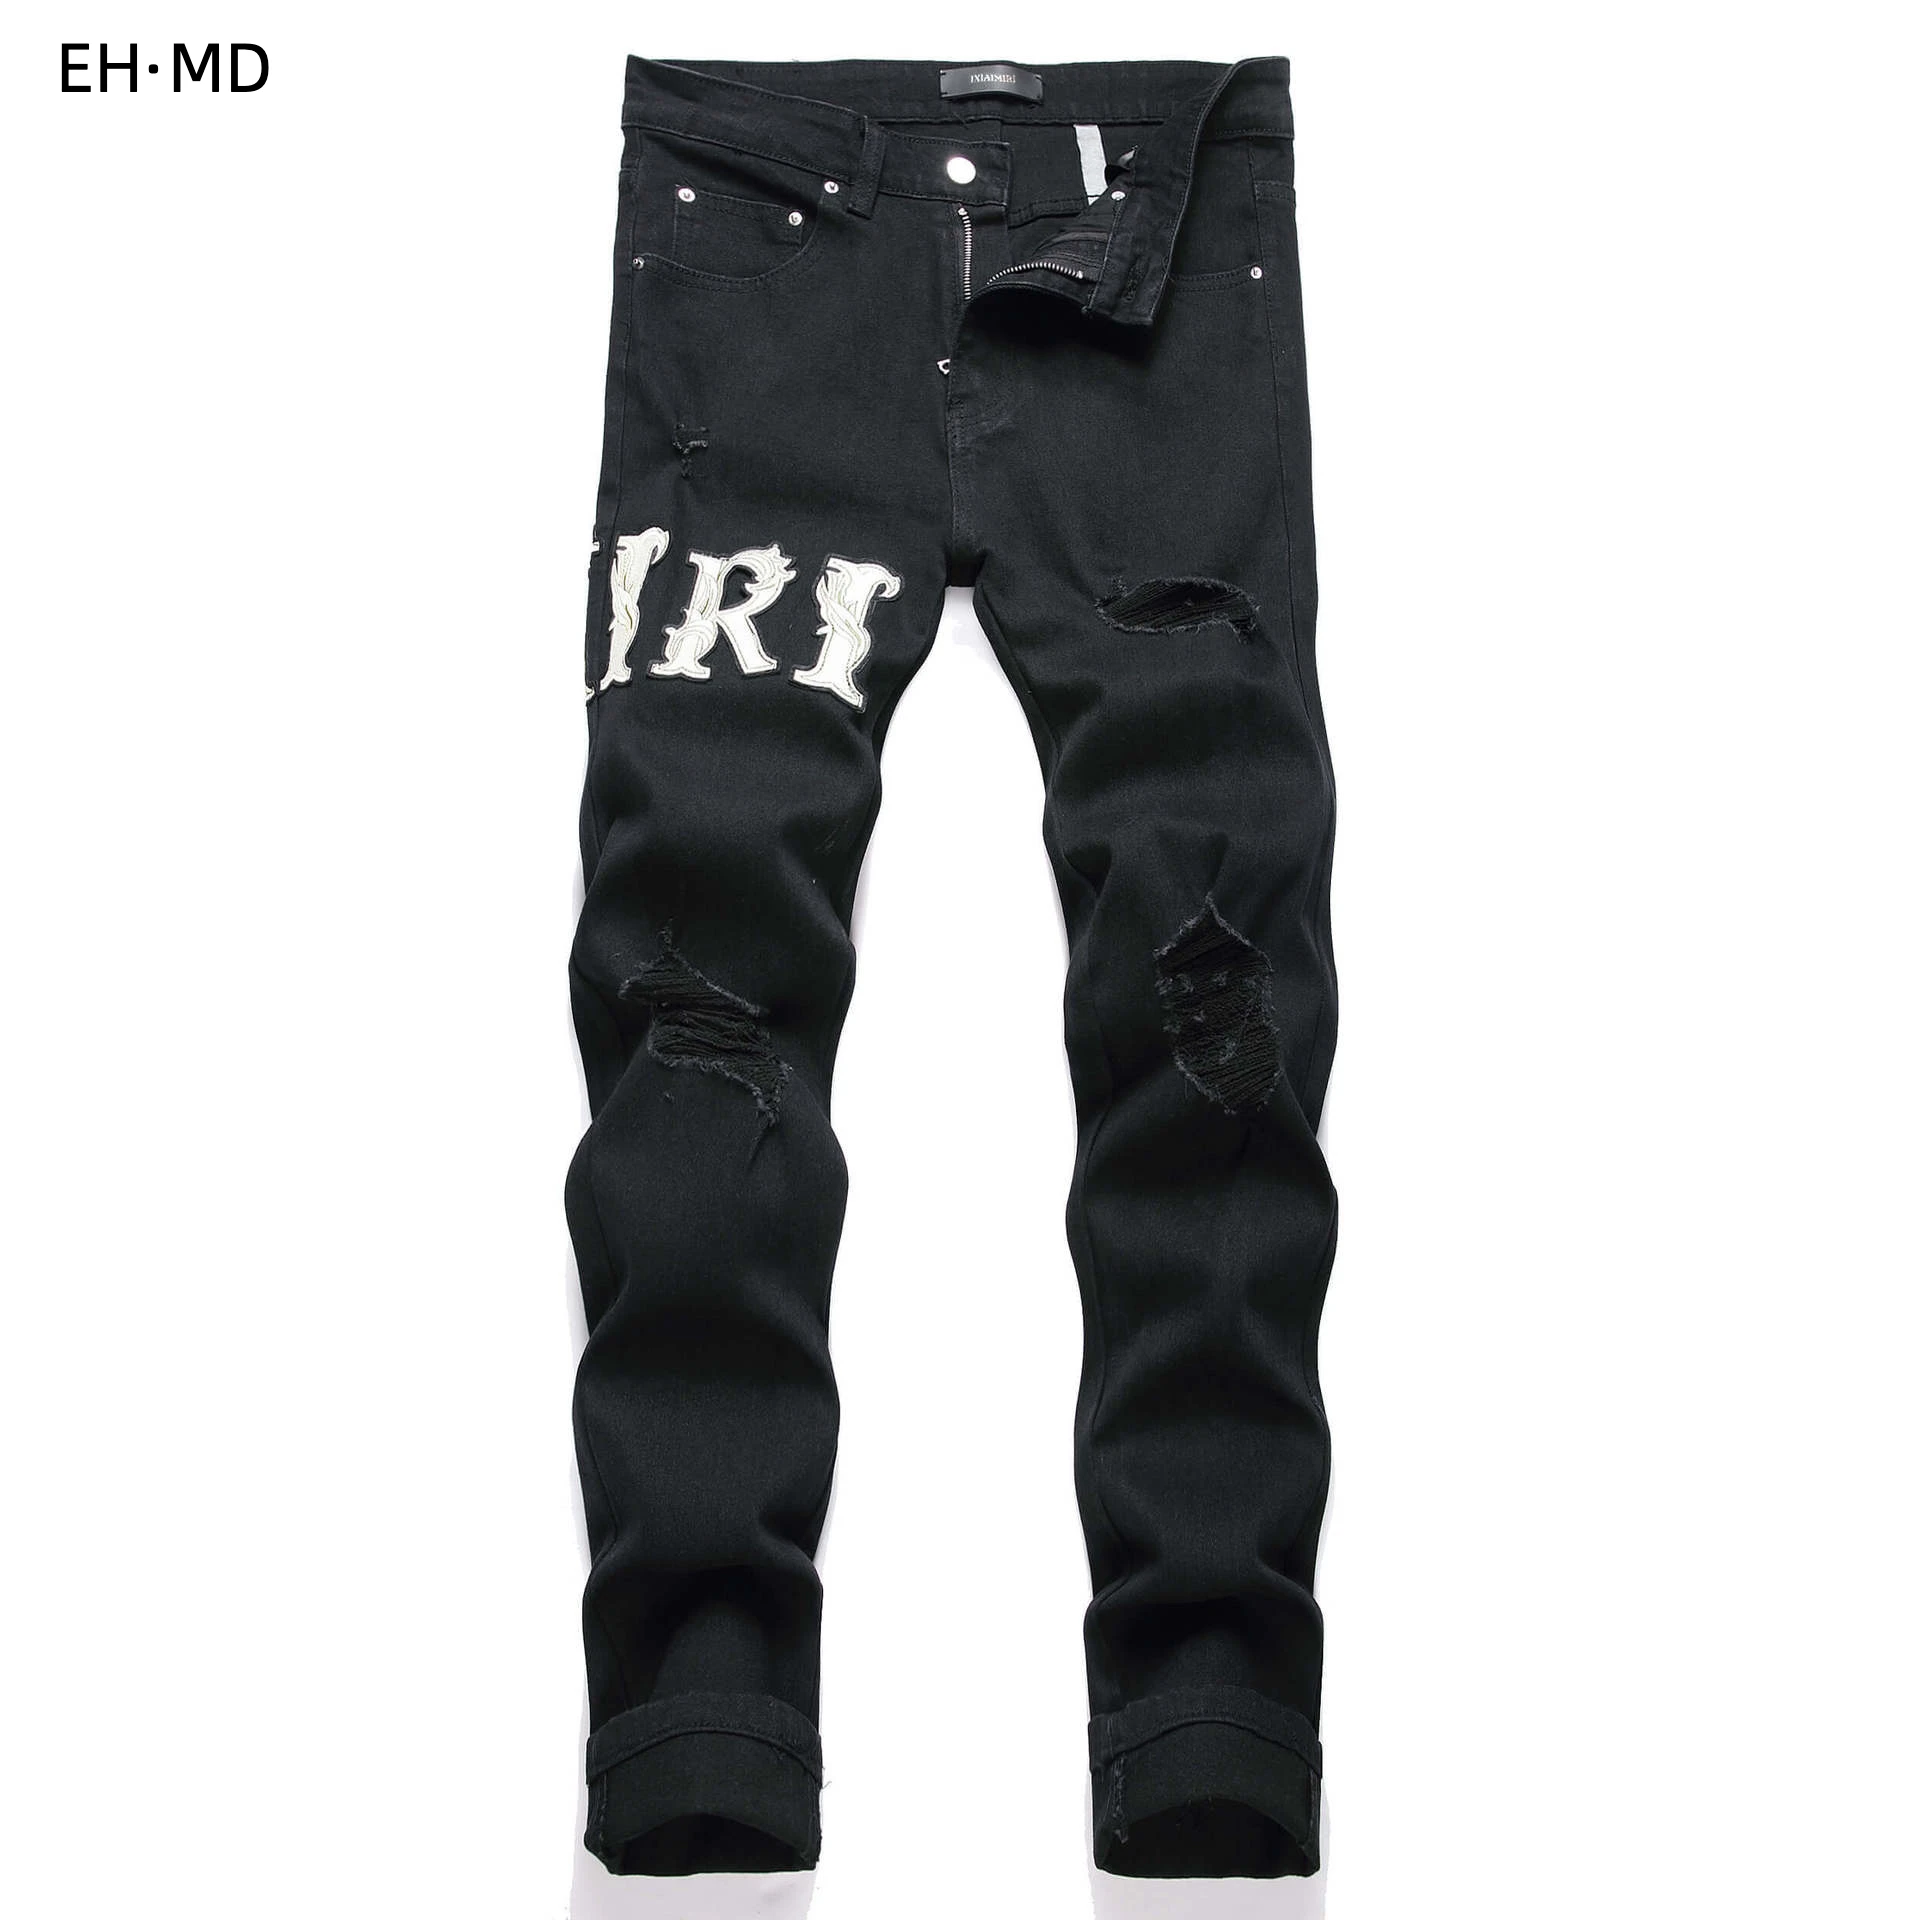 

Summer Handmade Embroidery Jeans Men Pattern Small Foot Slim Fit Perforated 3D Skull Pants Worn Loose Vintage Stretch Street 024